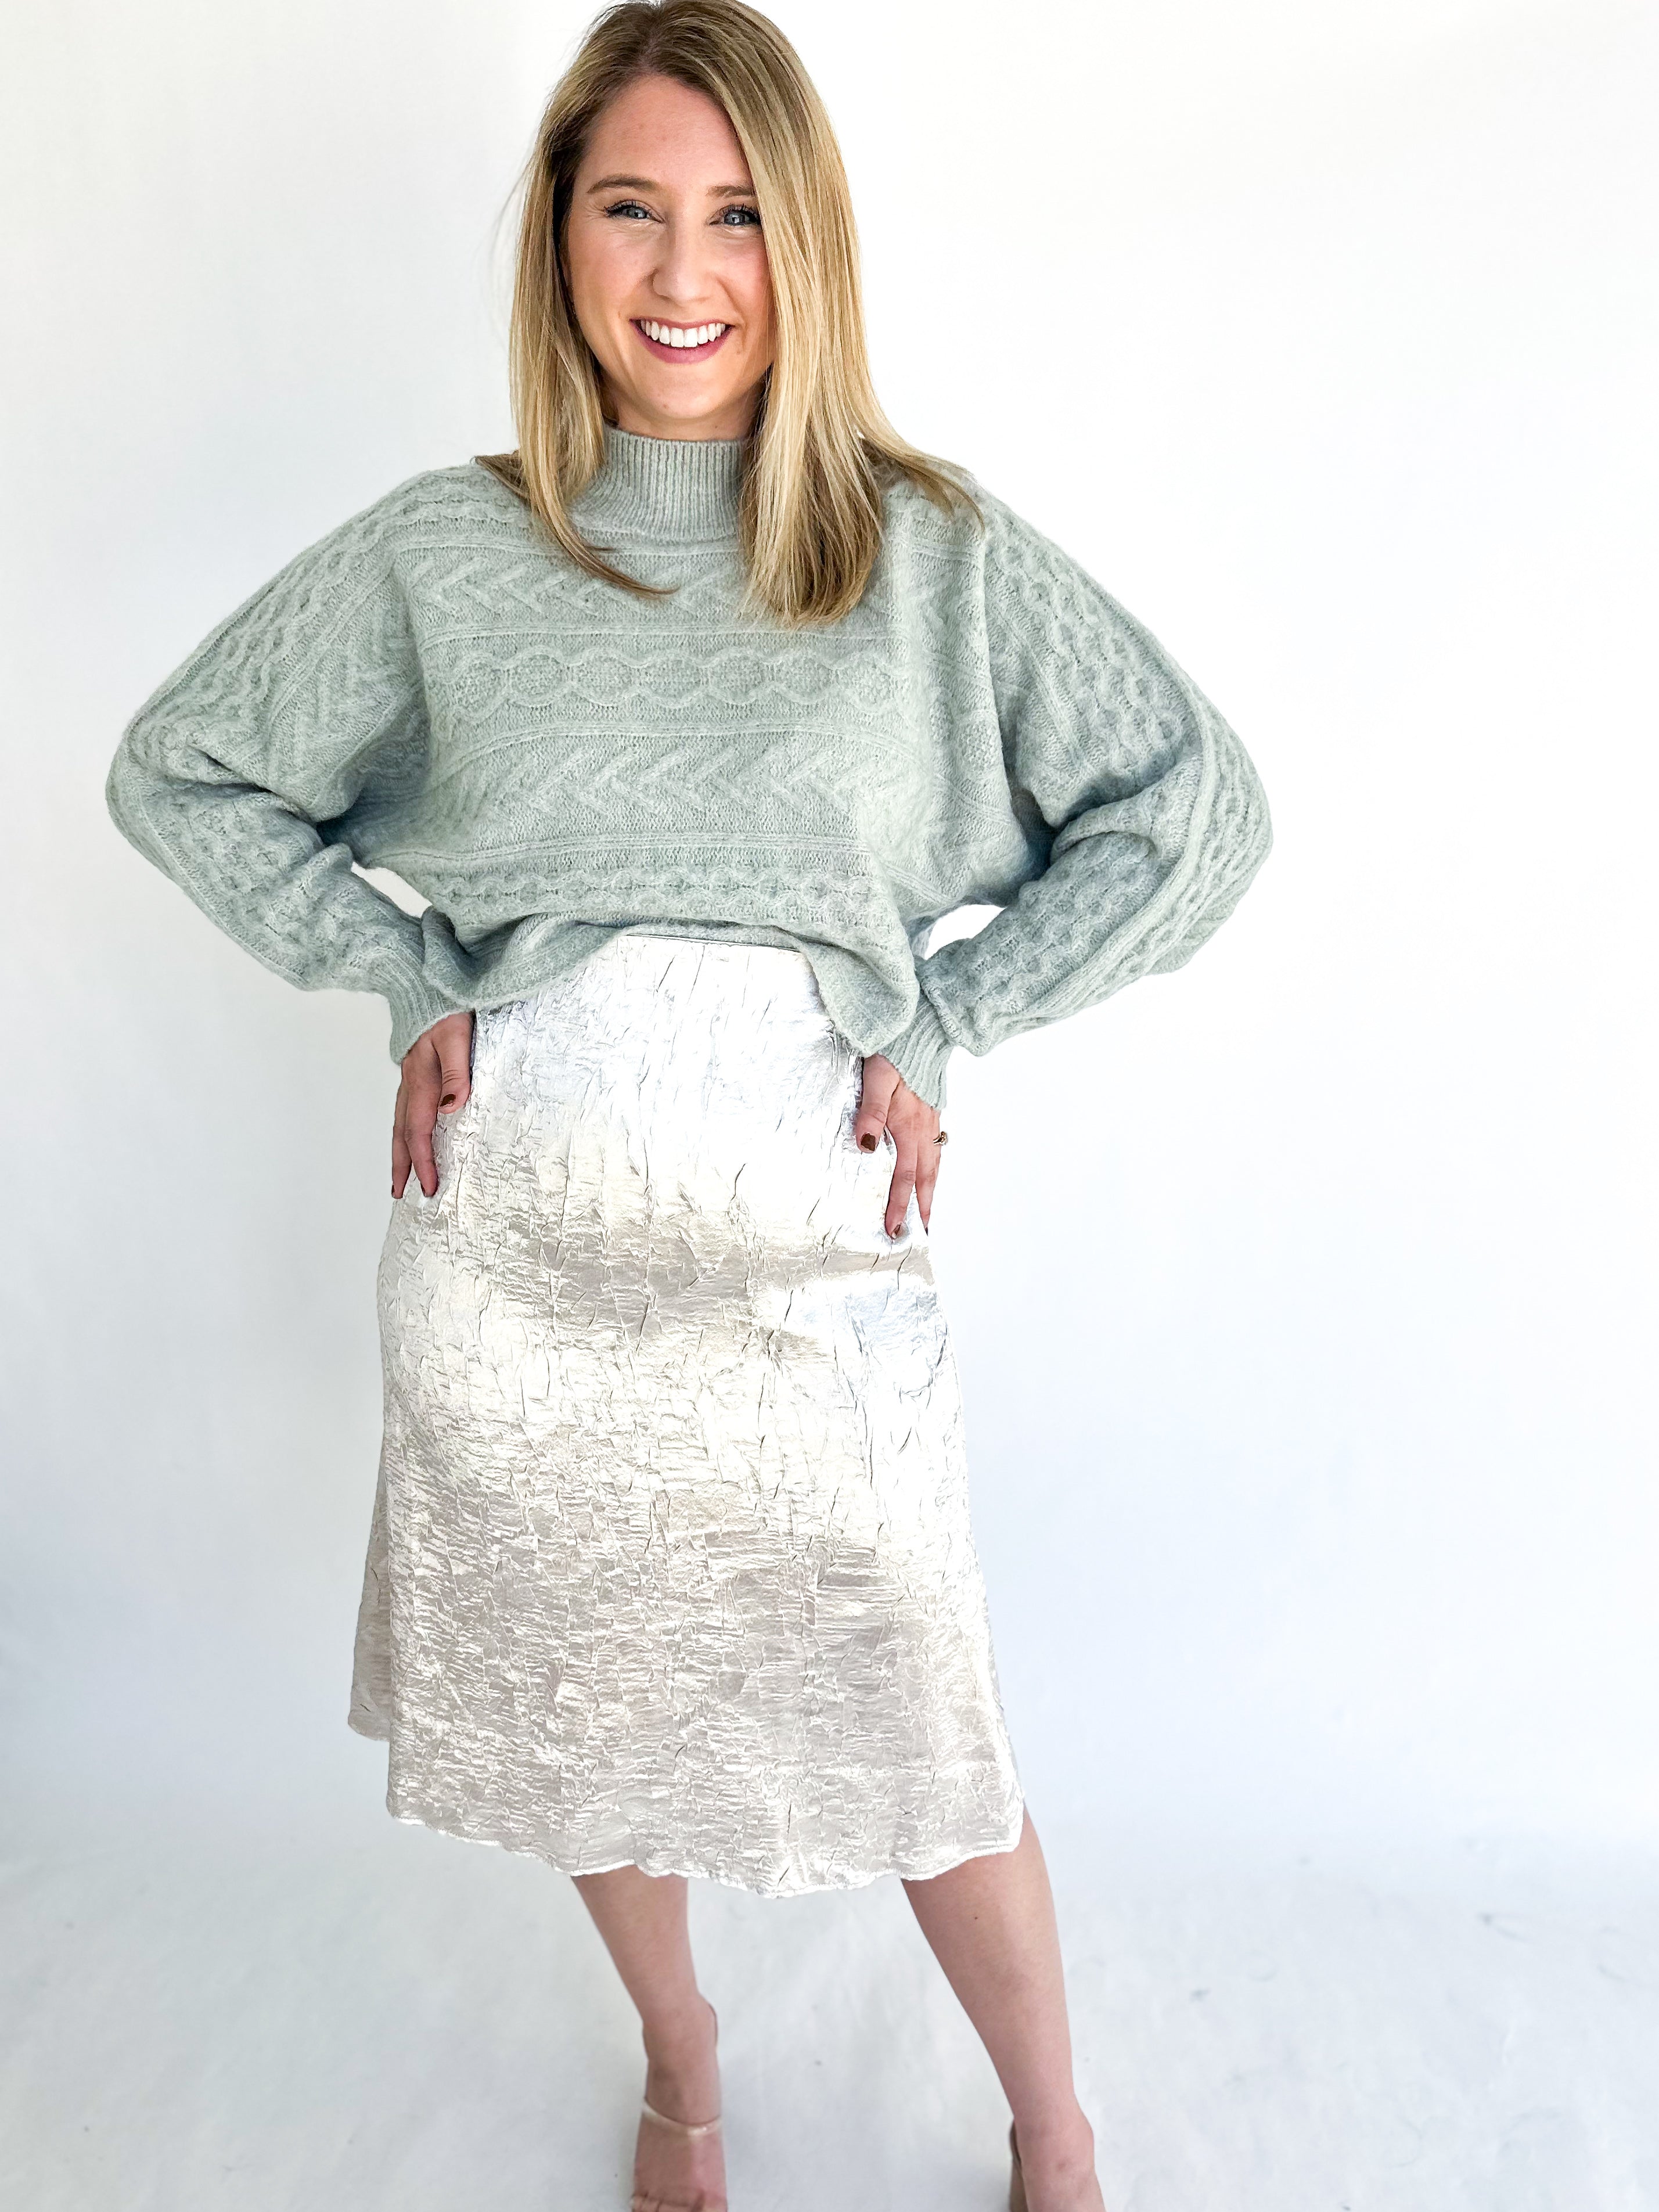 Shimmery Shine Midi Skirt-410 Shorts/Skirts-ALLIE ROSE-July & June Women's Fashion Boutique Located in San Antonio, Texas